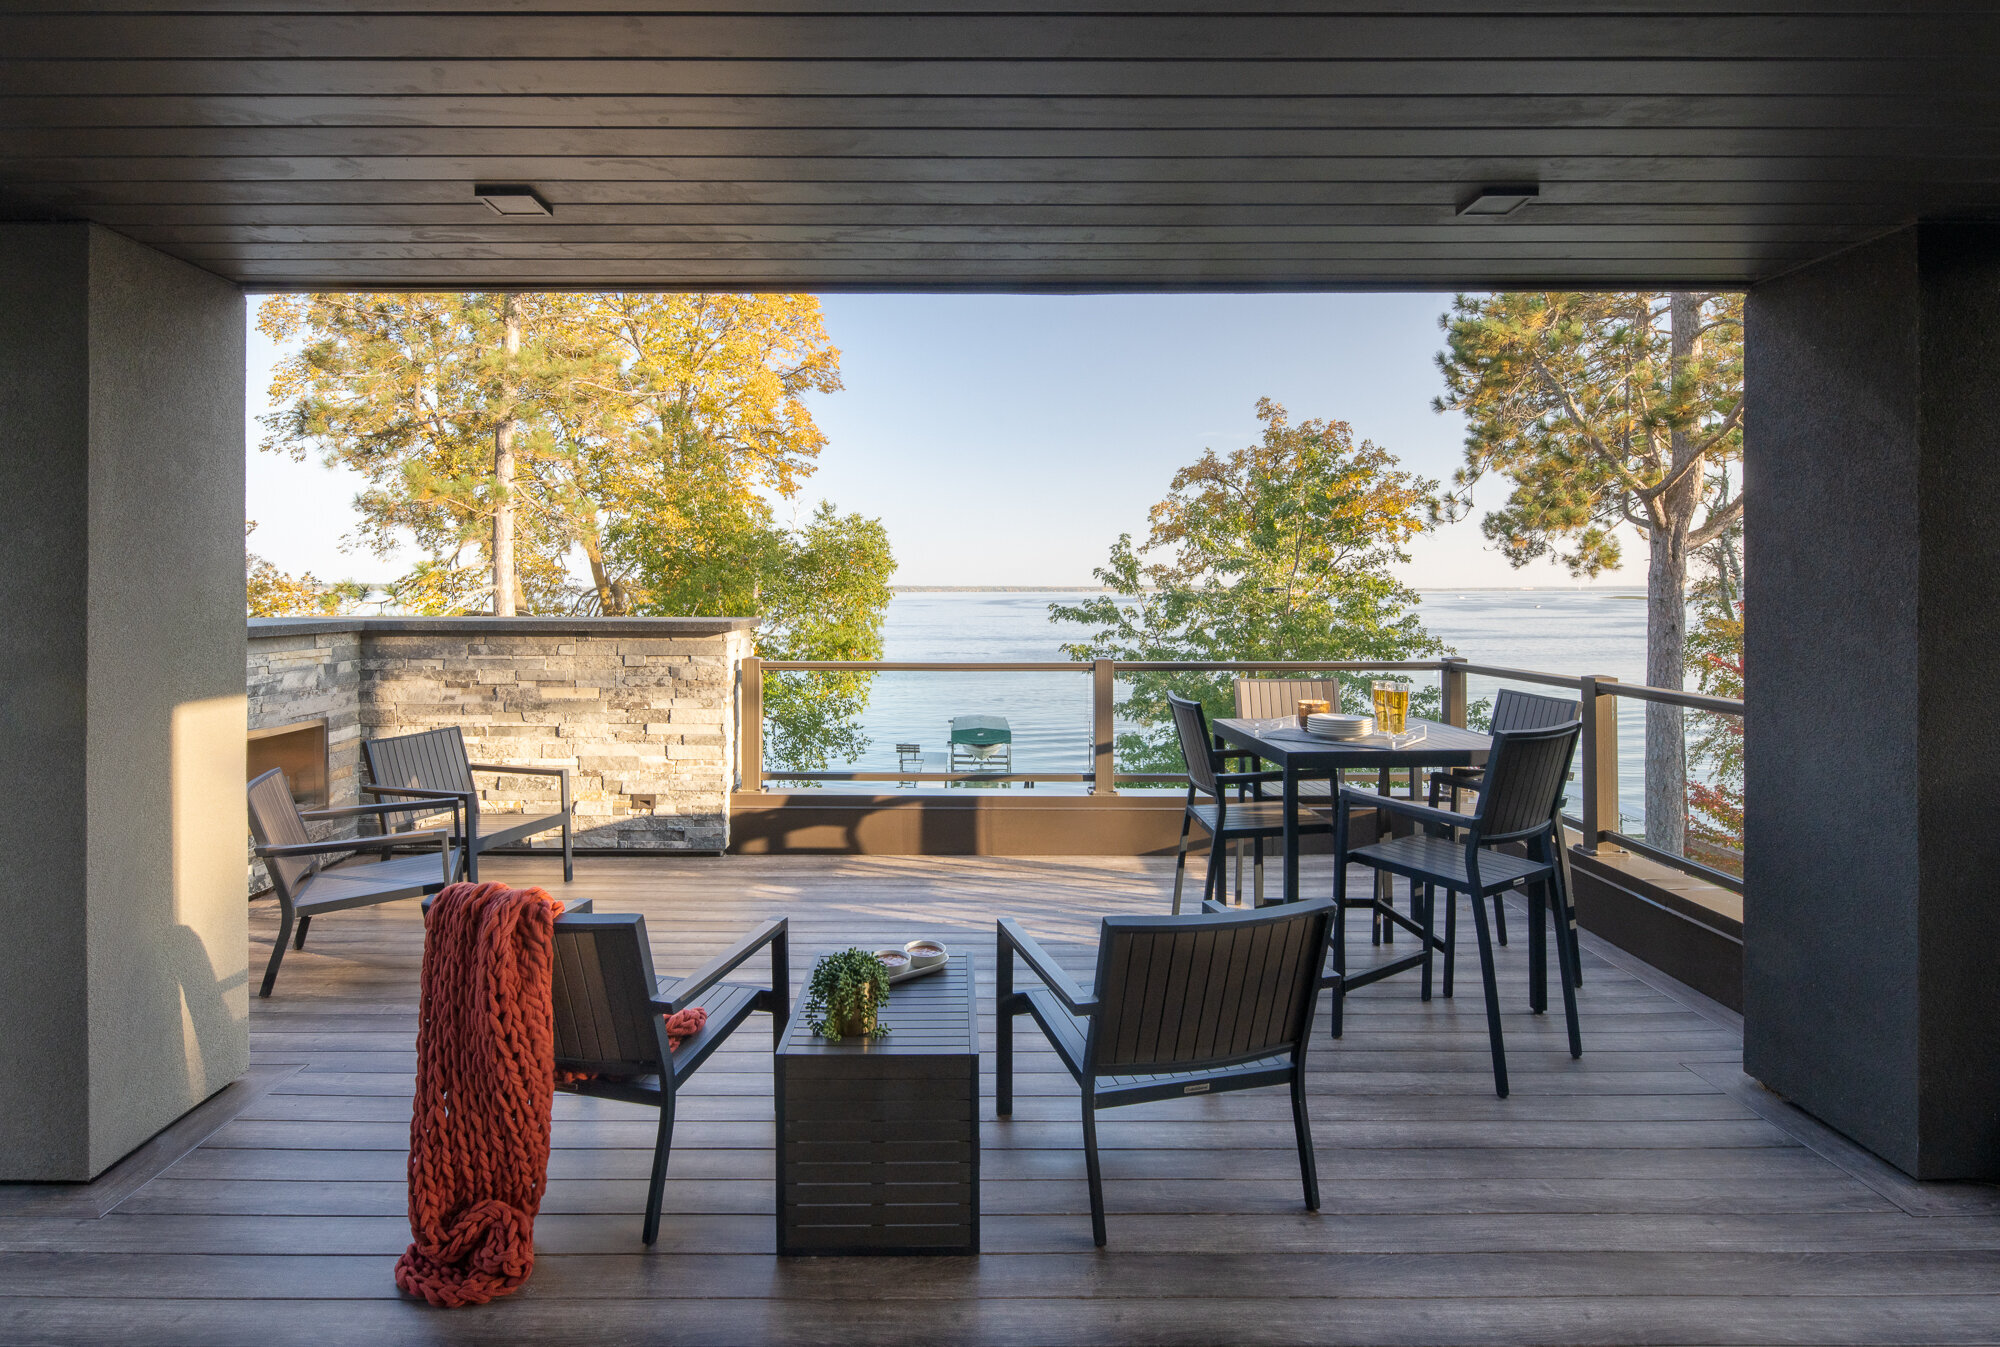 Beautiful balcony overlooking a lake on an autumn evening